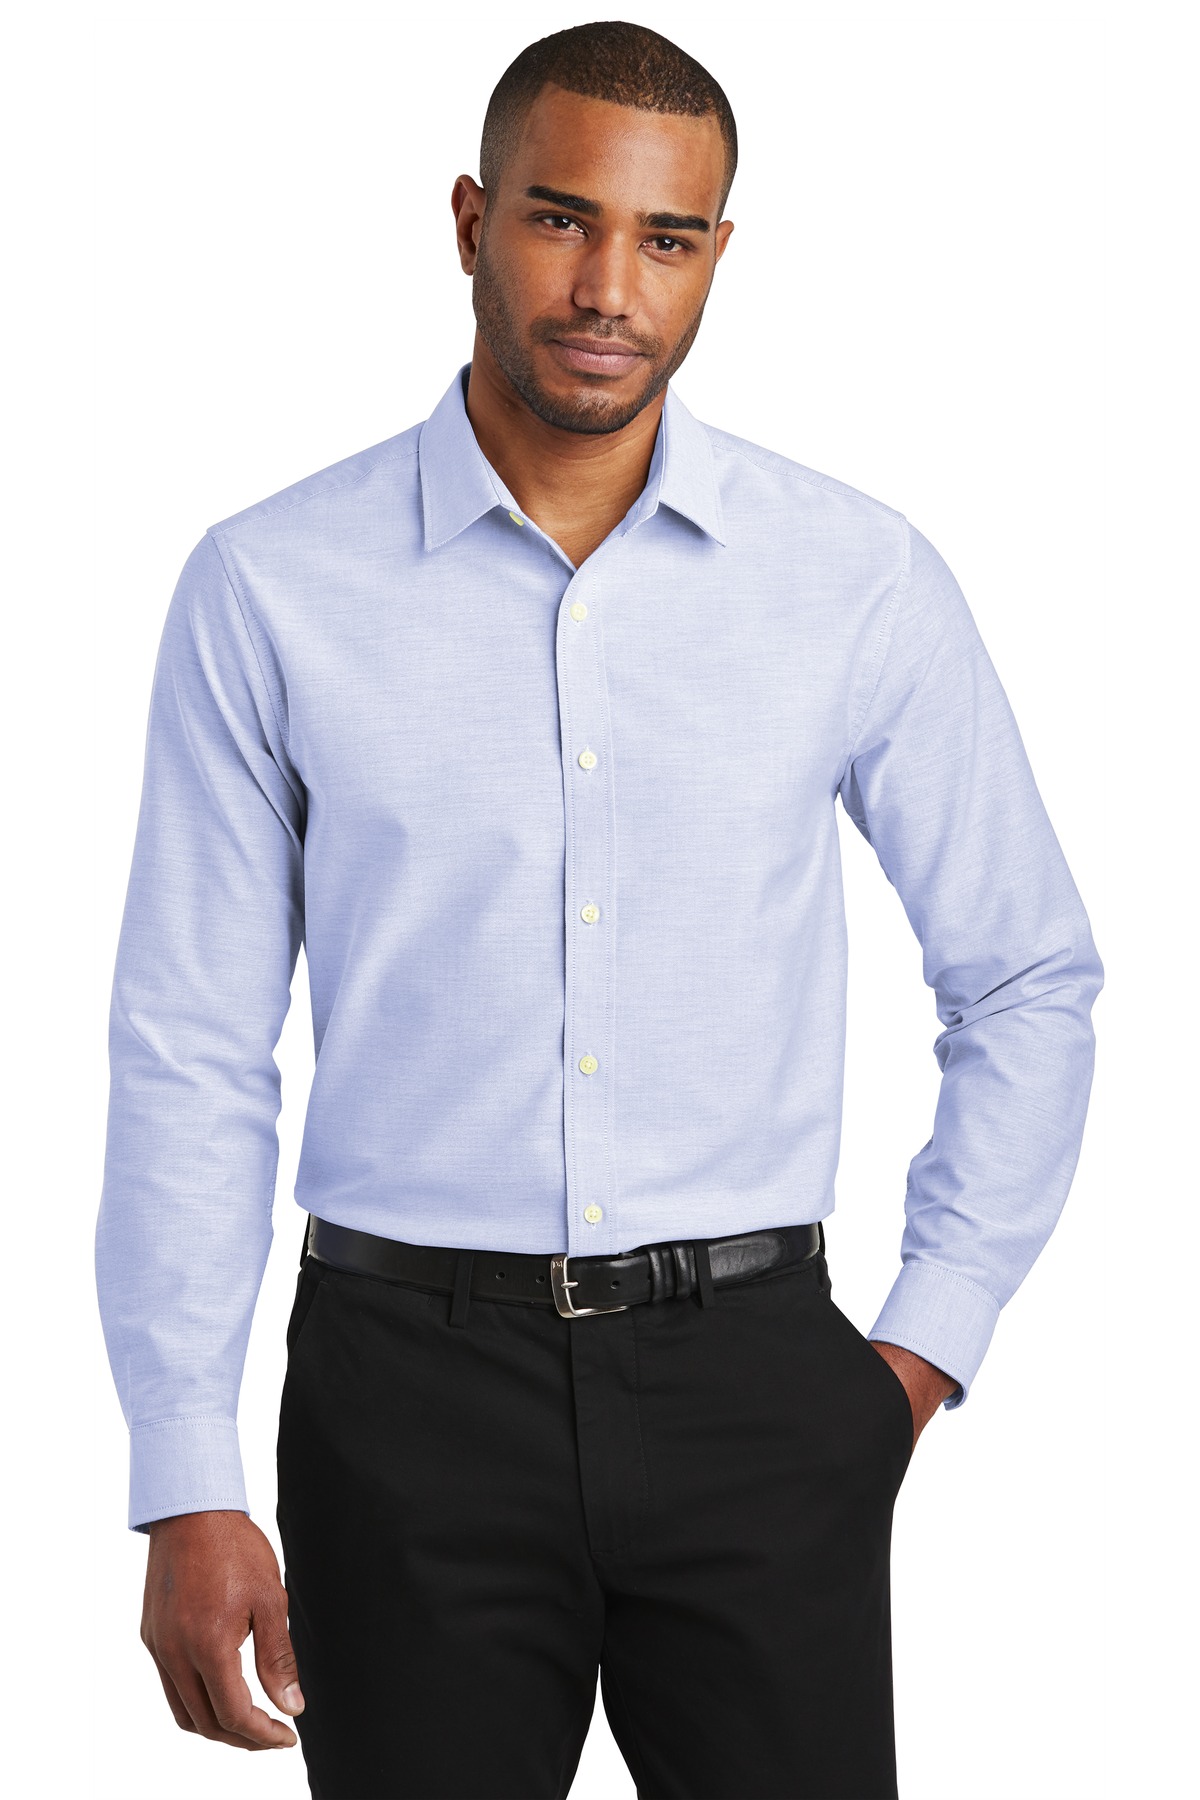 Port Authority Woven Shirts for Hospitality ® Slim Fit SuperPro Oxford Shirt.-Port Authority